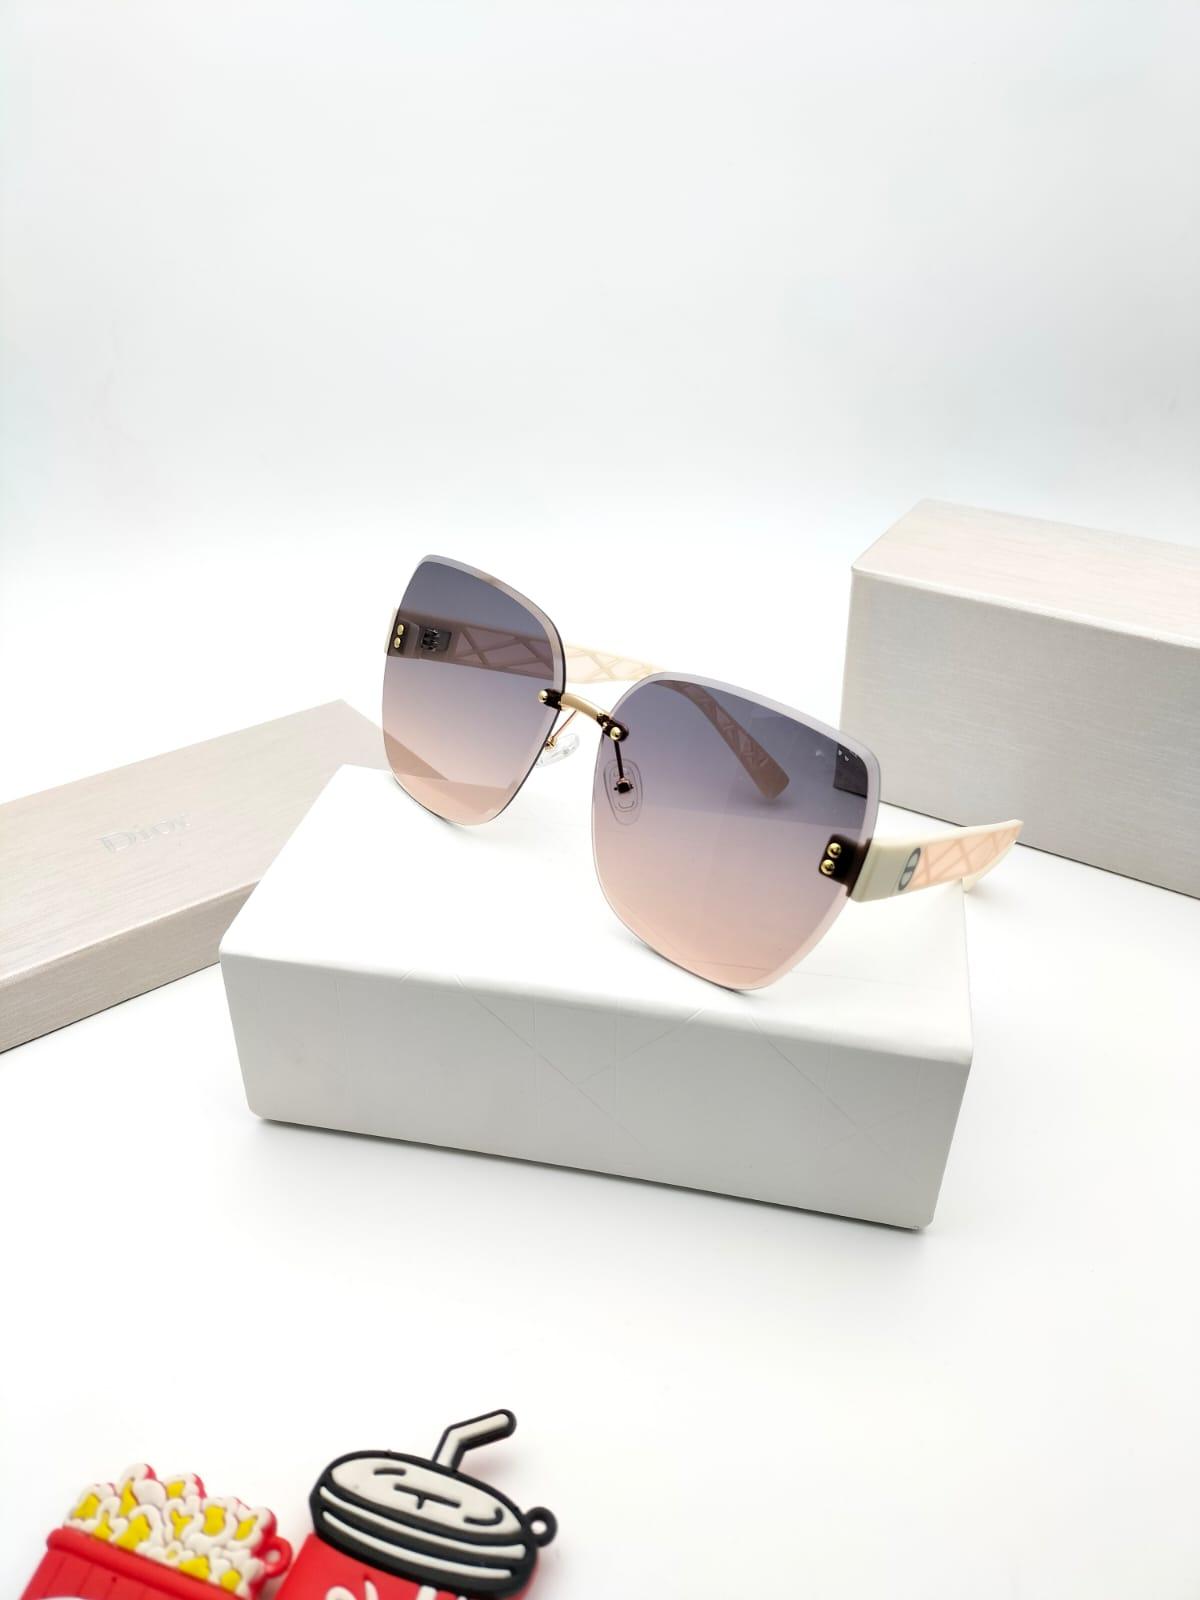 Dior spectacles A7002 - Customized Prescription Sunglasses and Spectacles